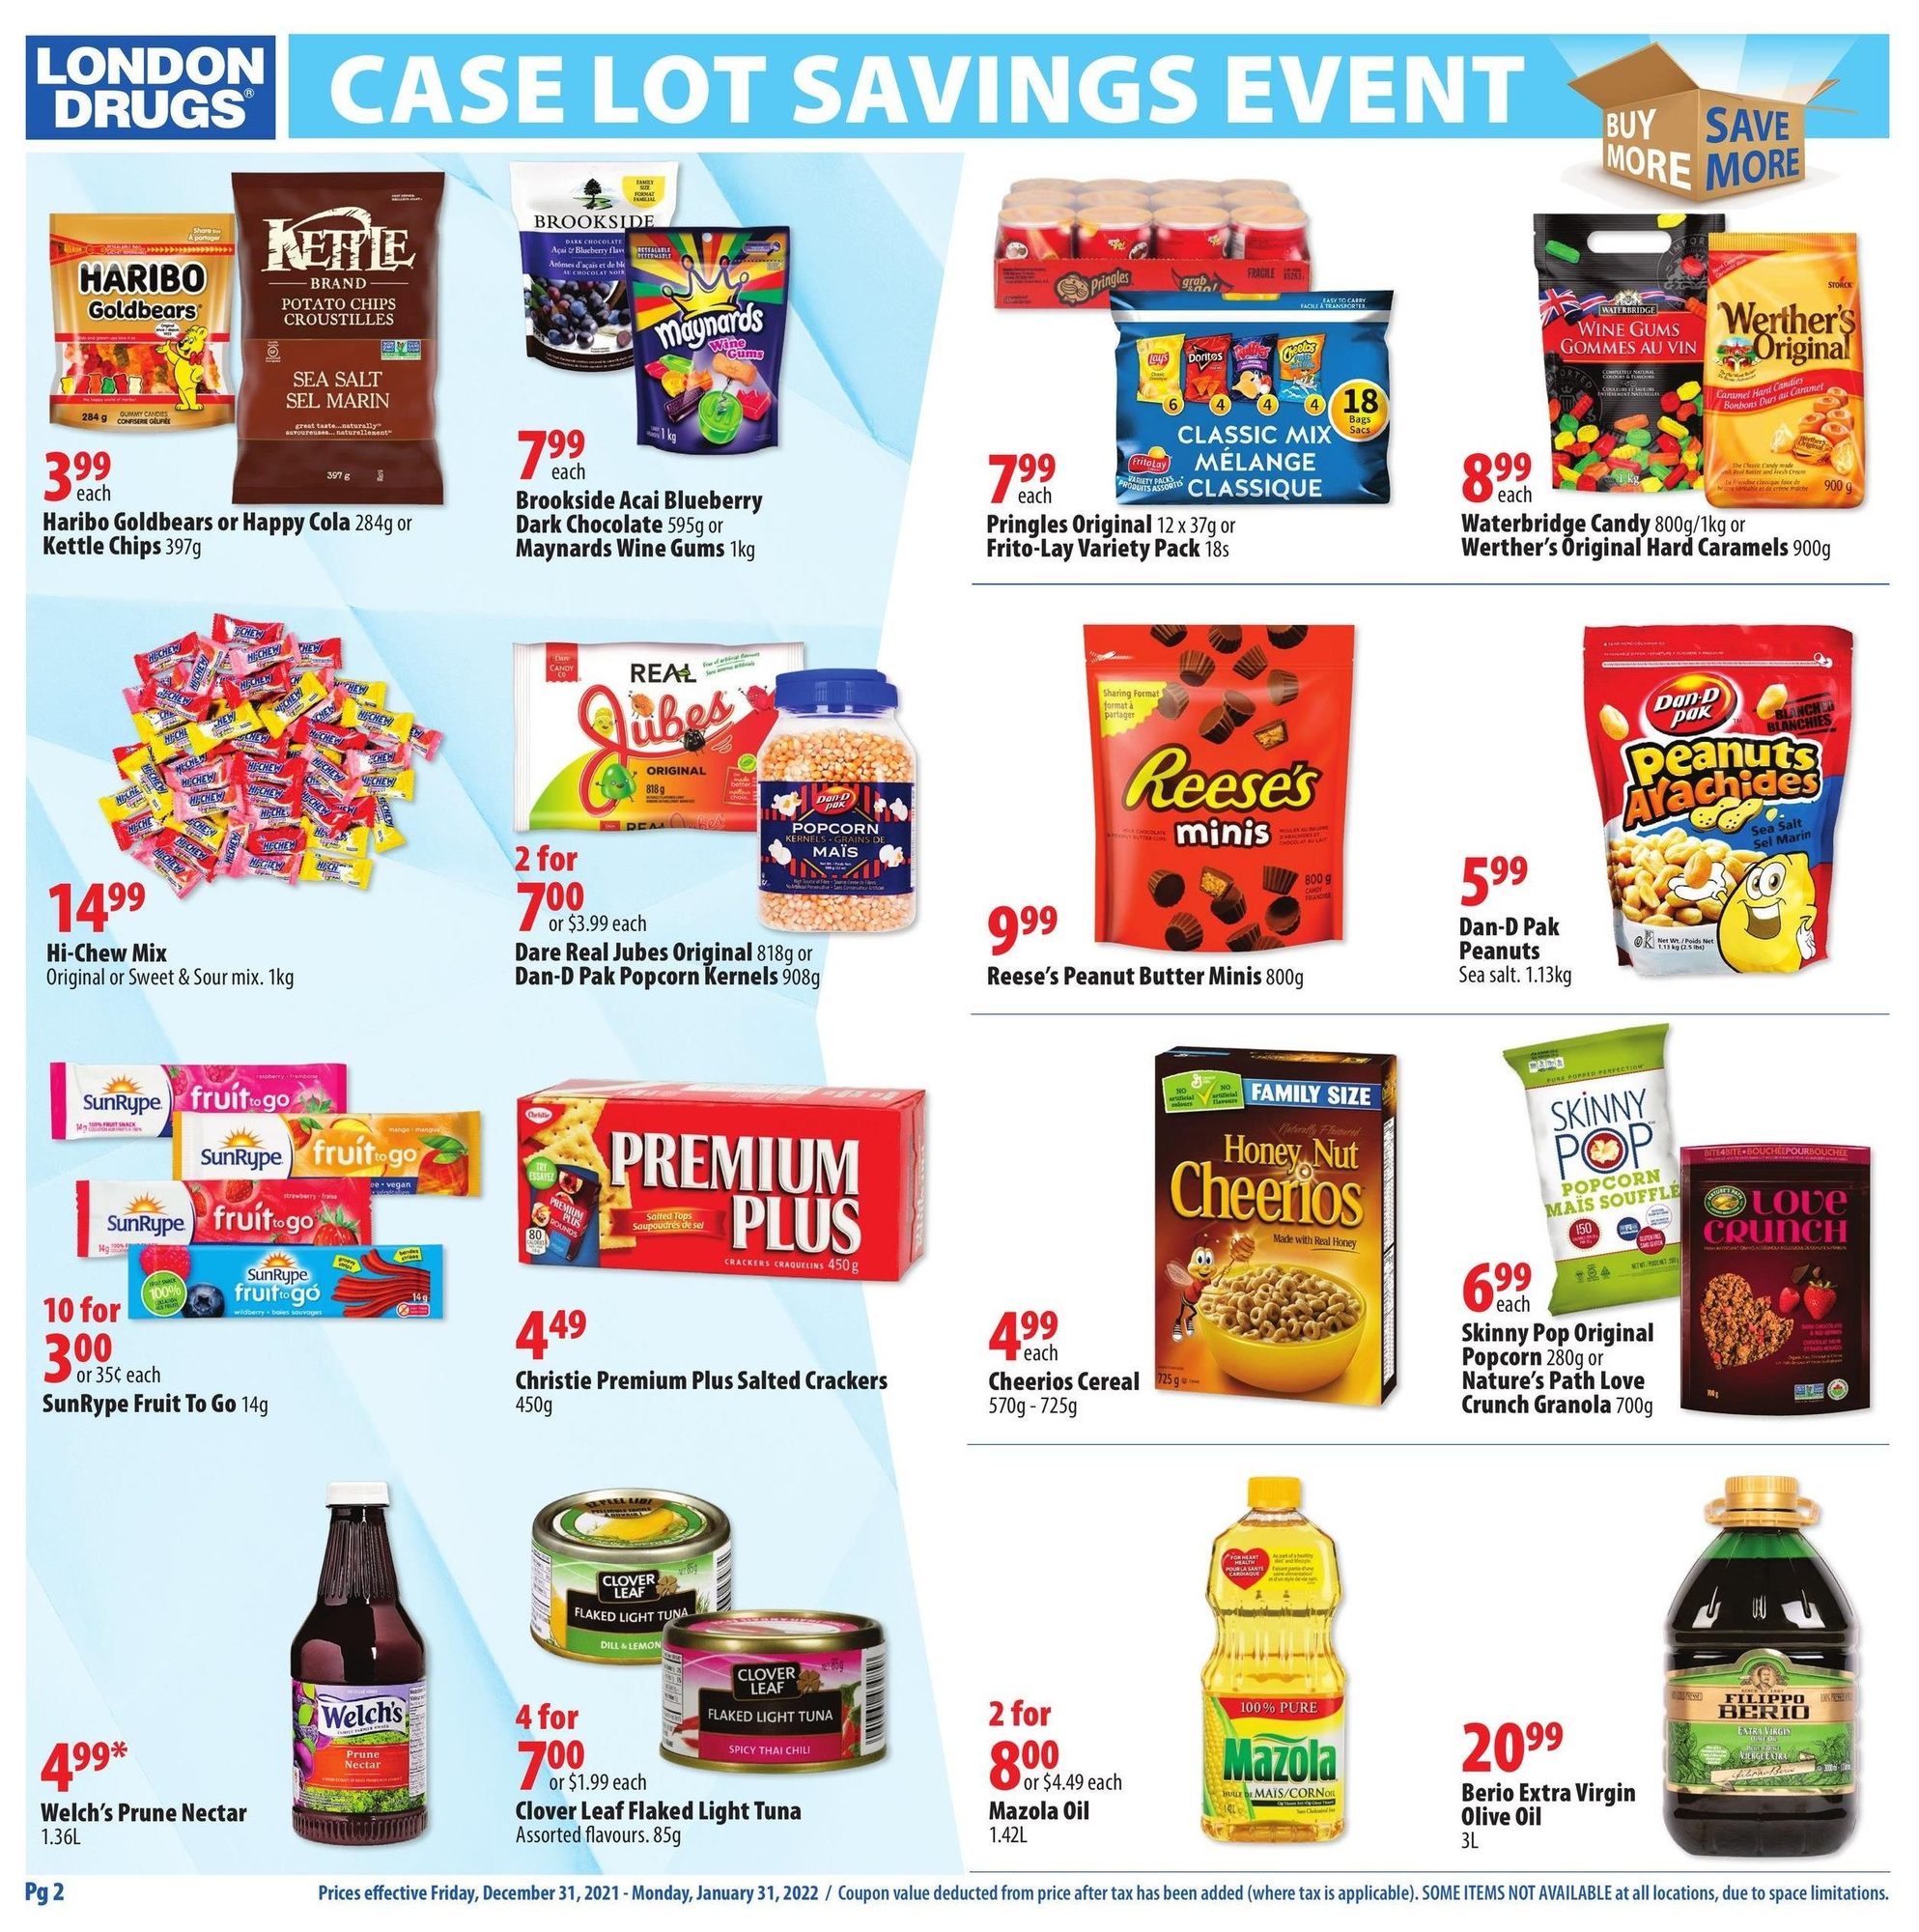 London Drugs - Case Lot Savings Event - Page 2